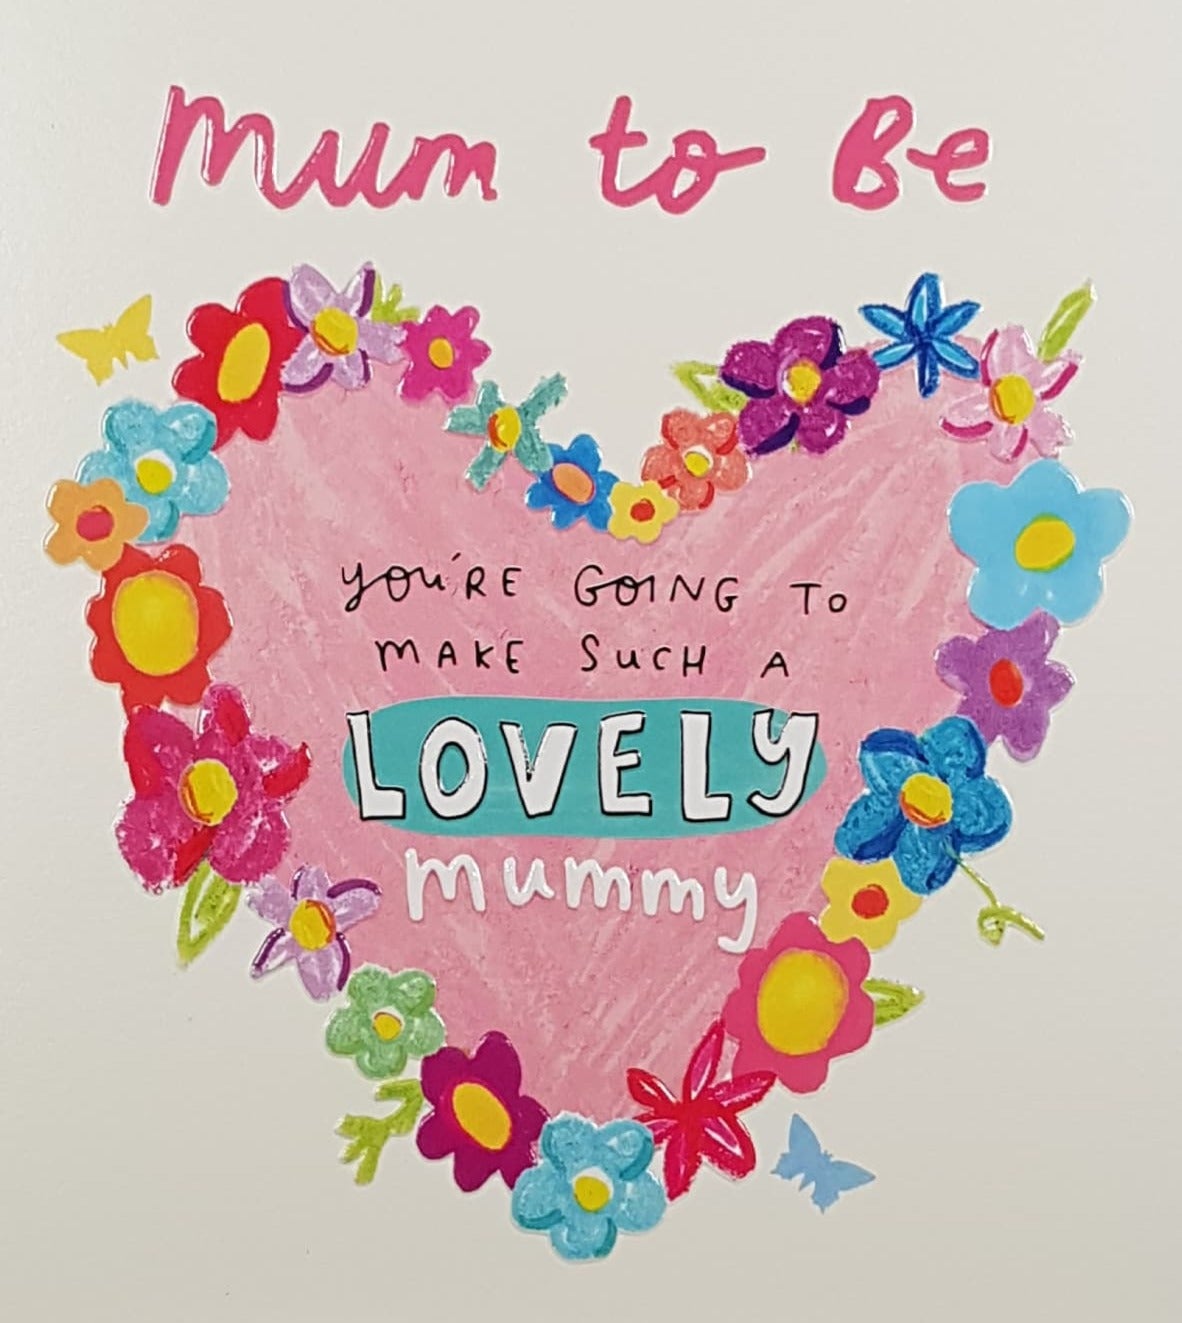 New Baby Card - Mum To Be / Going To Make Such A Lovely Mummy